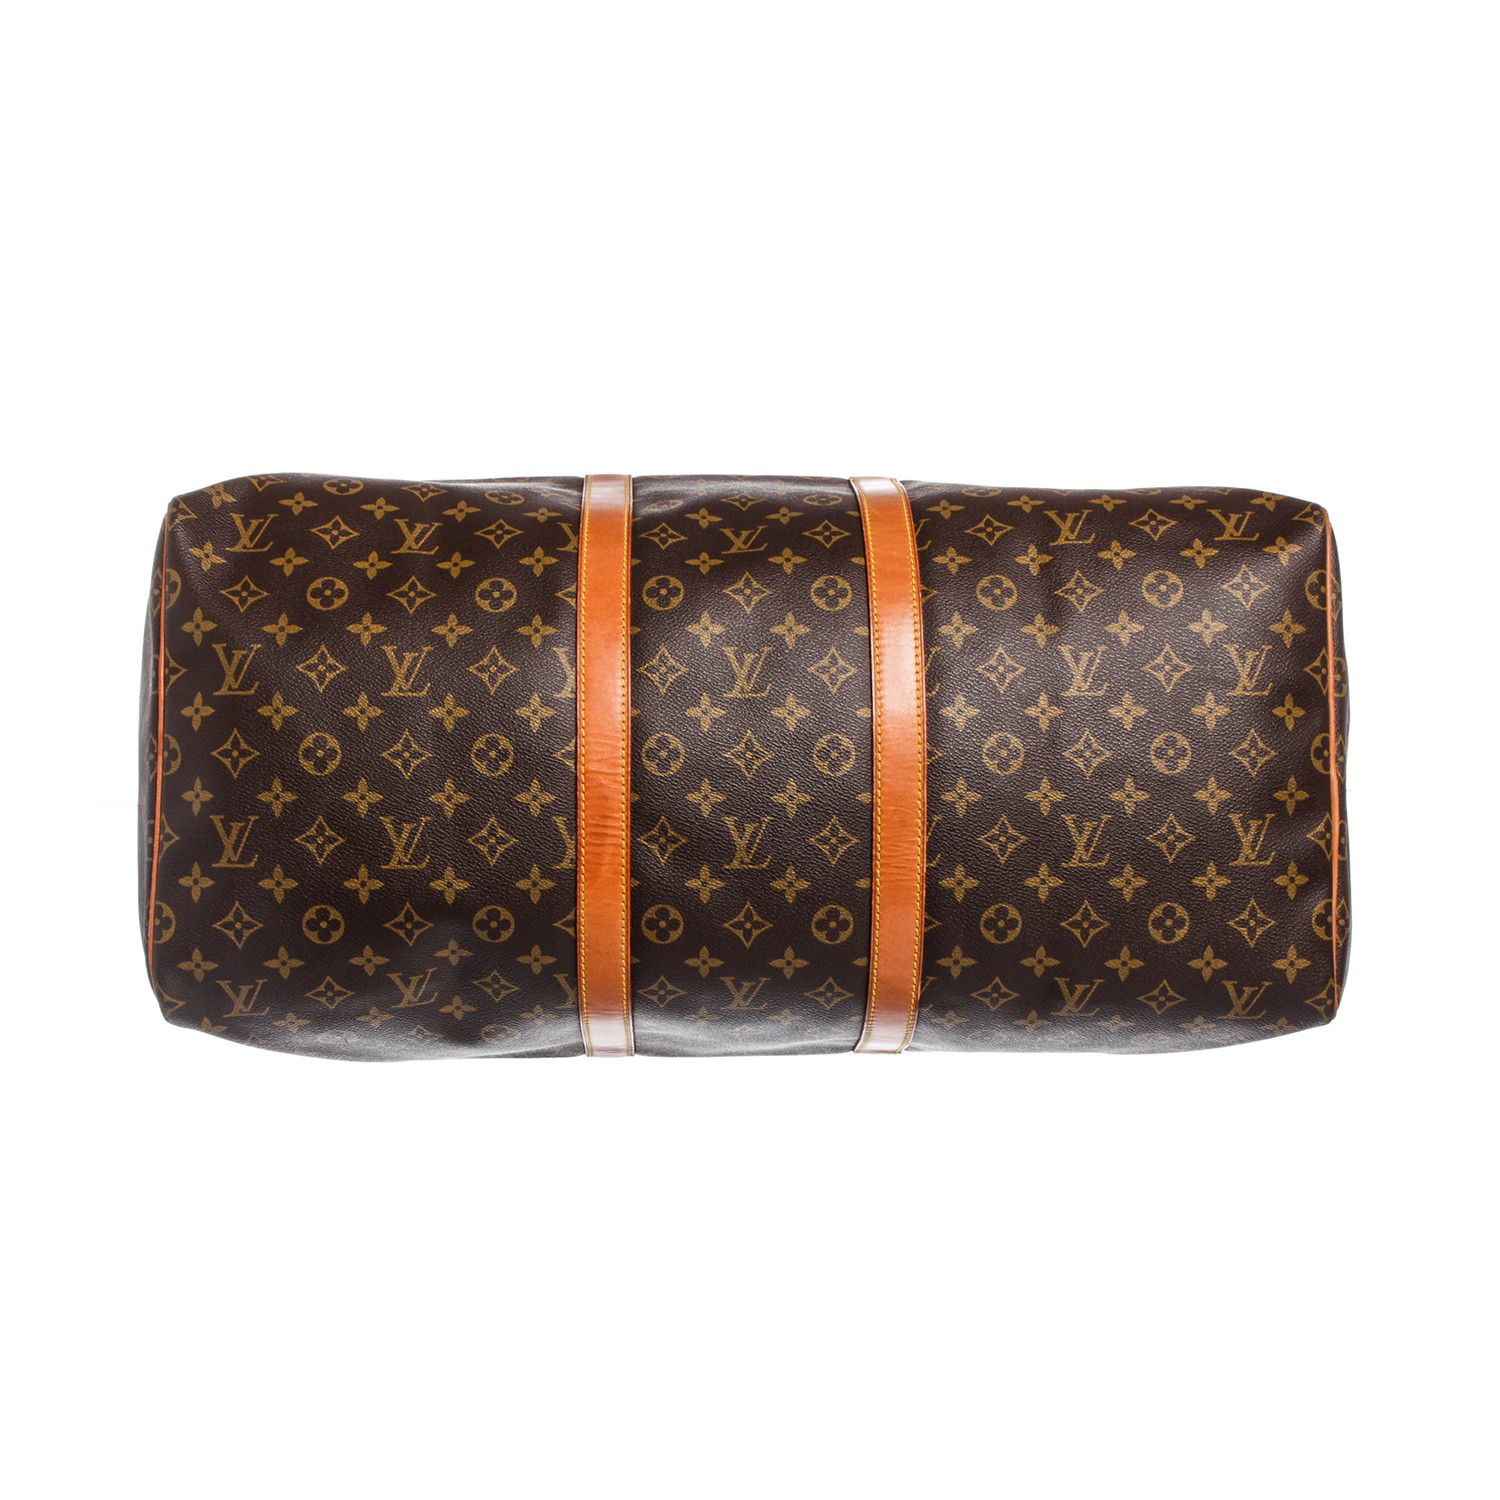 Louis Vuitton // Monogram Canvas Leather Keepall 55 cm Duffle Bag Luggage // MI0921 // Pre-Owned ...